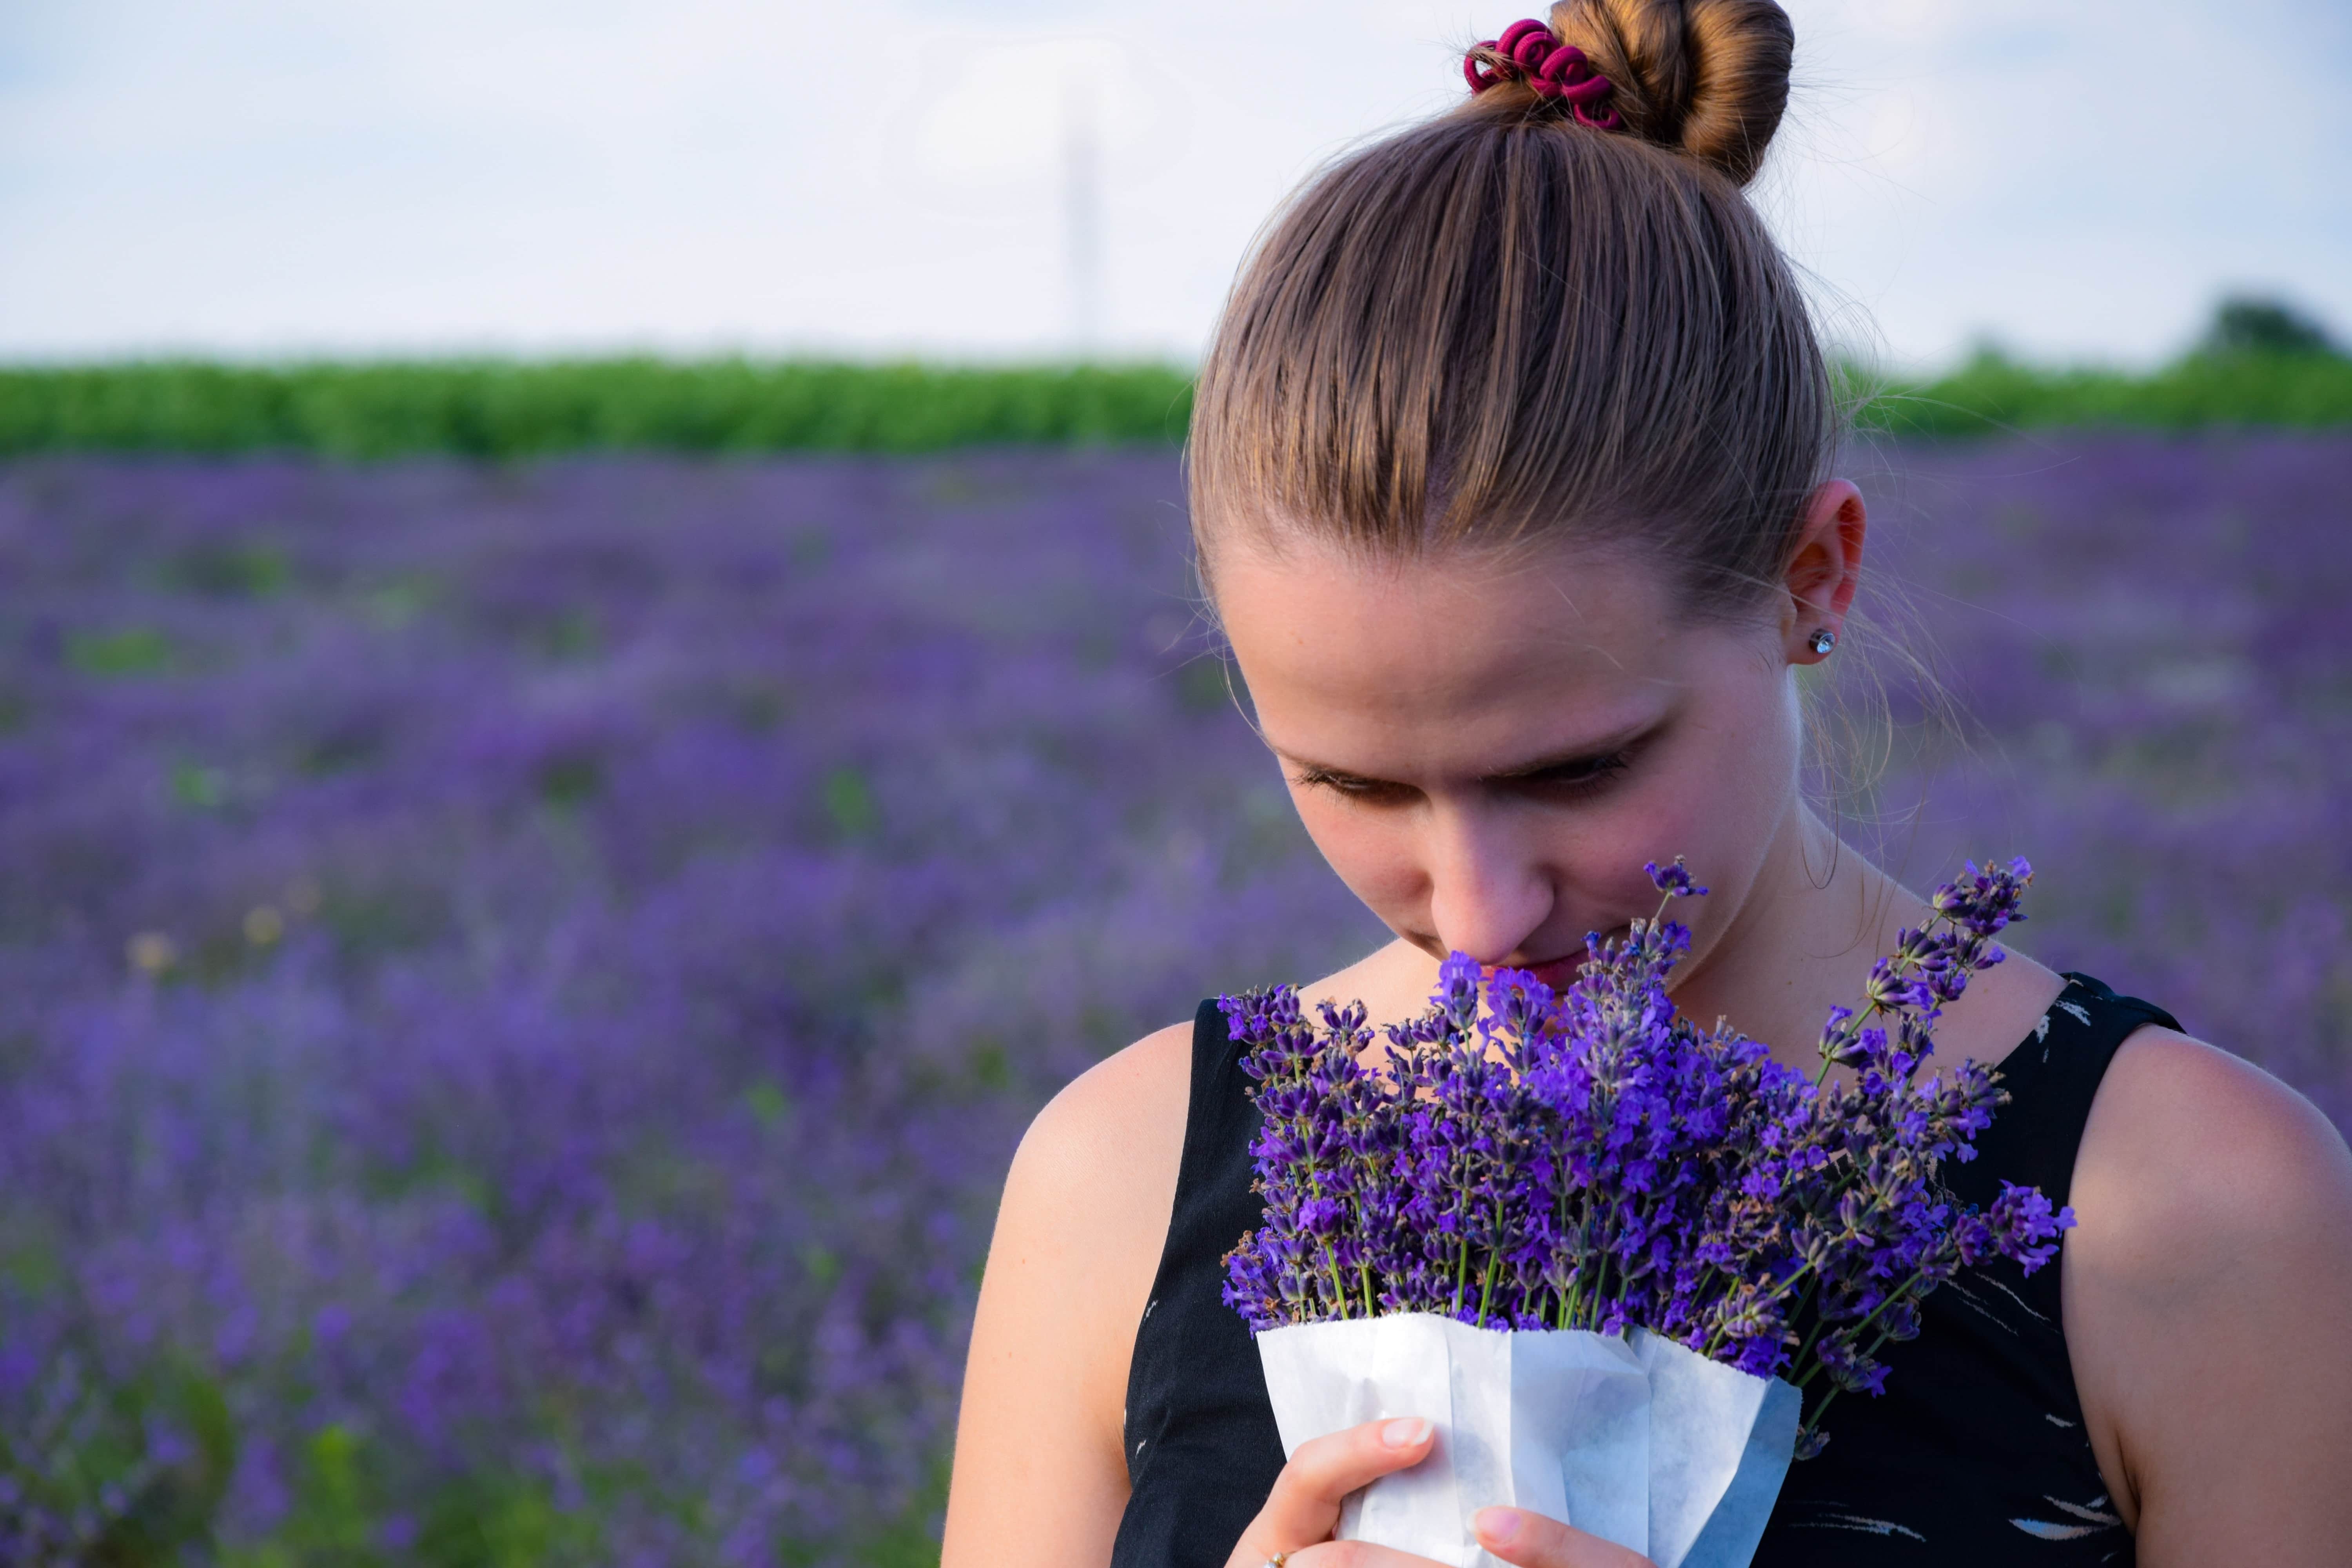 Woman smelling a bunch of lavender while standing in a field of lavender